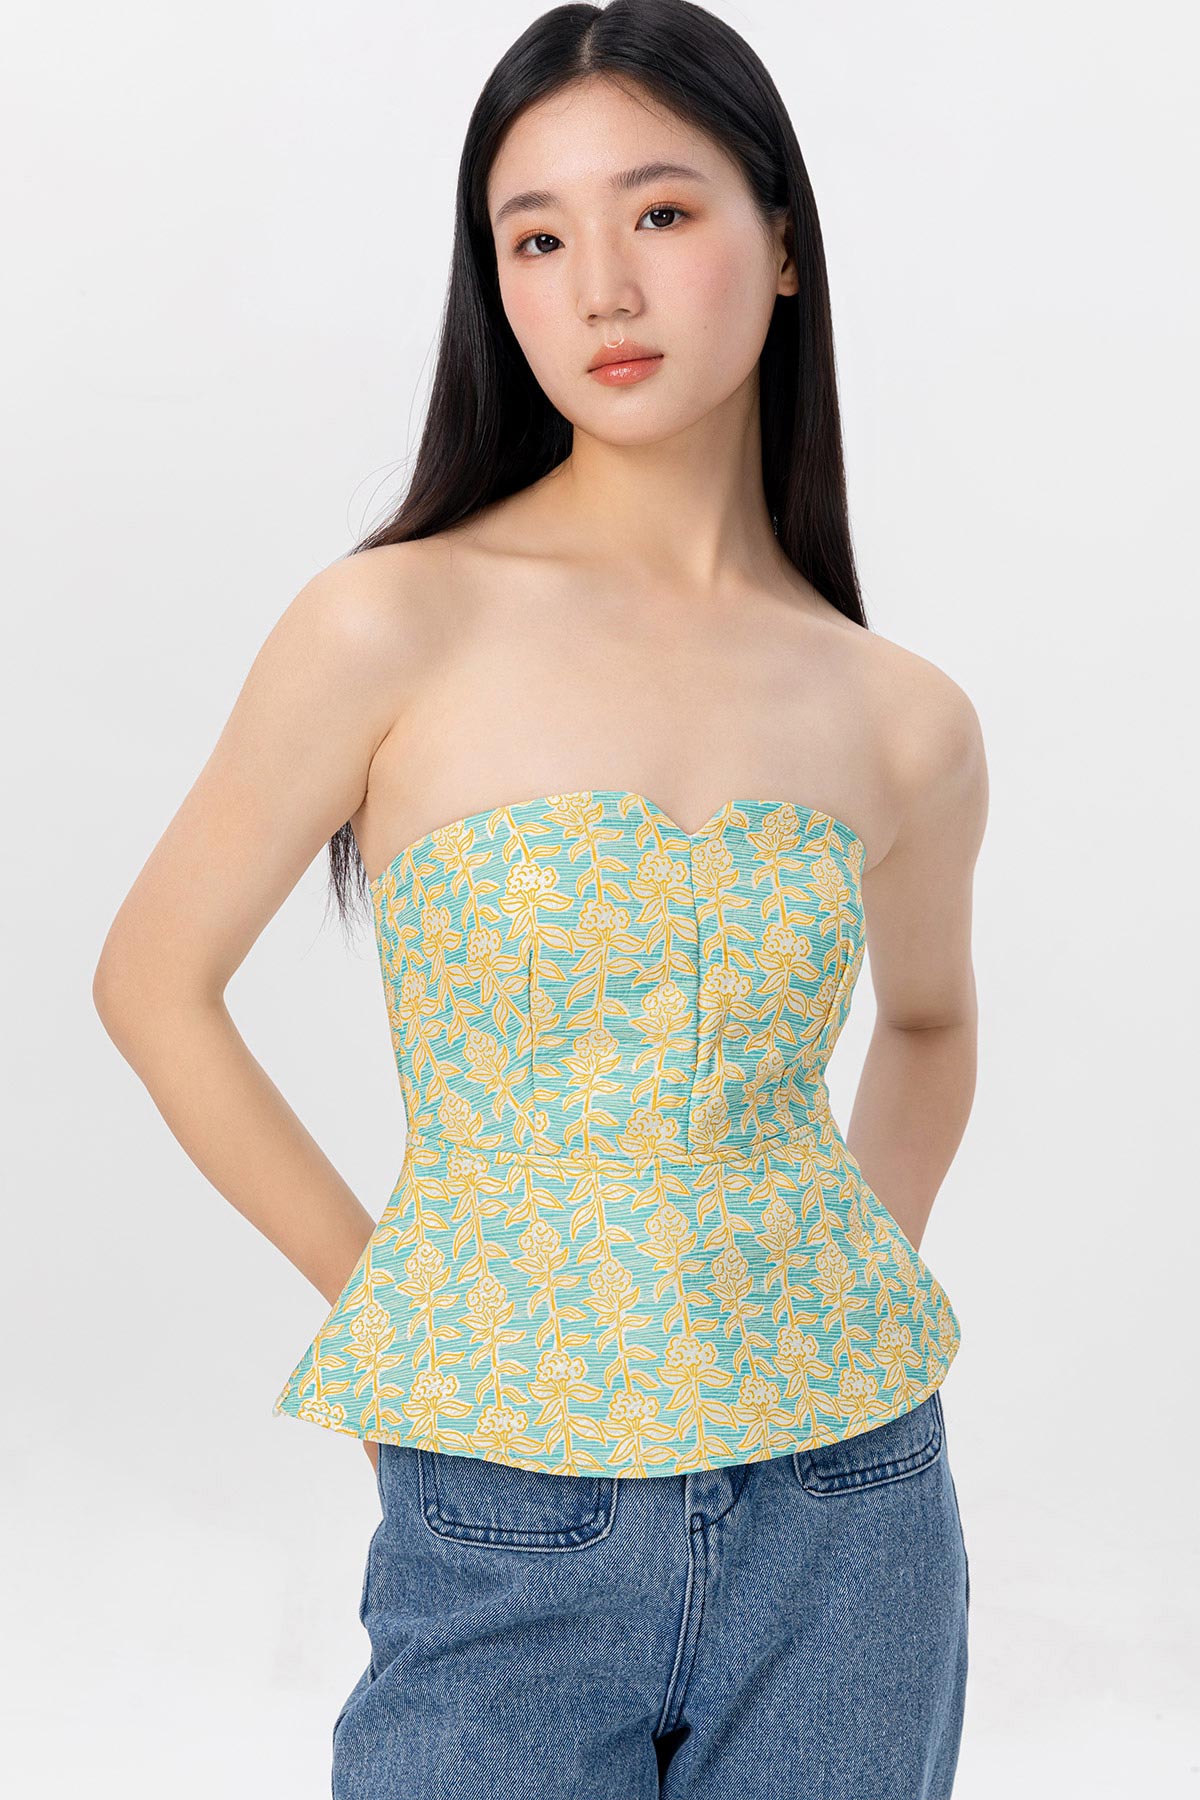 CYRIEL PADDED TOP - MORNING OSMANTHUS [BY MODPARADE]